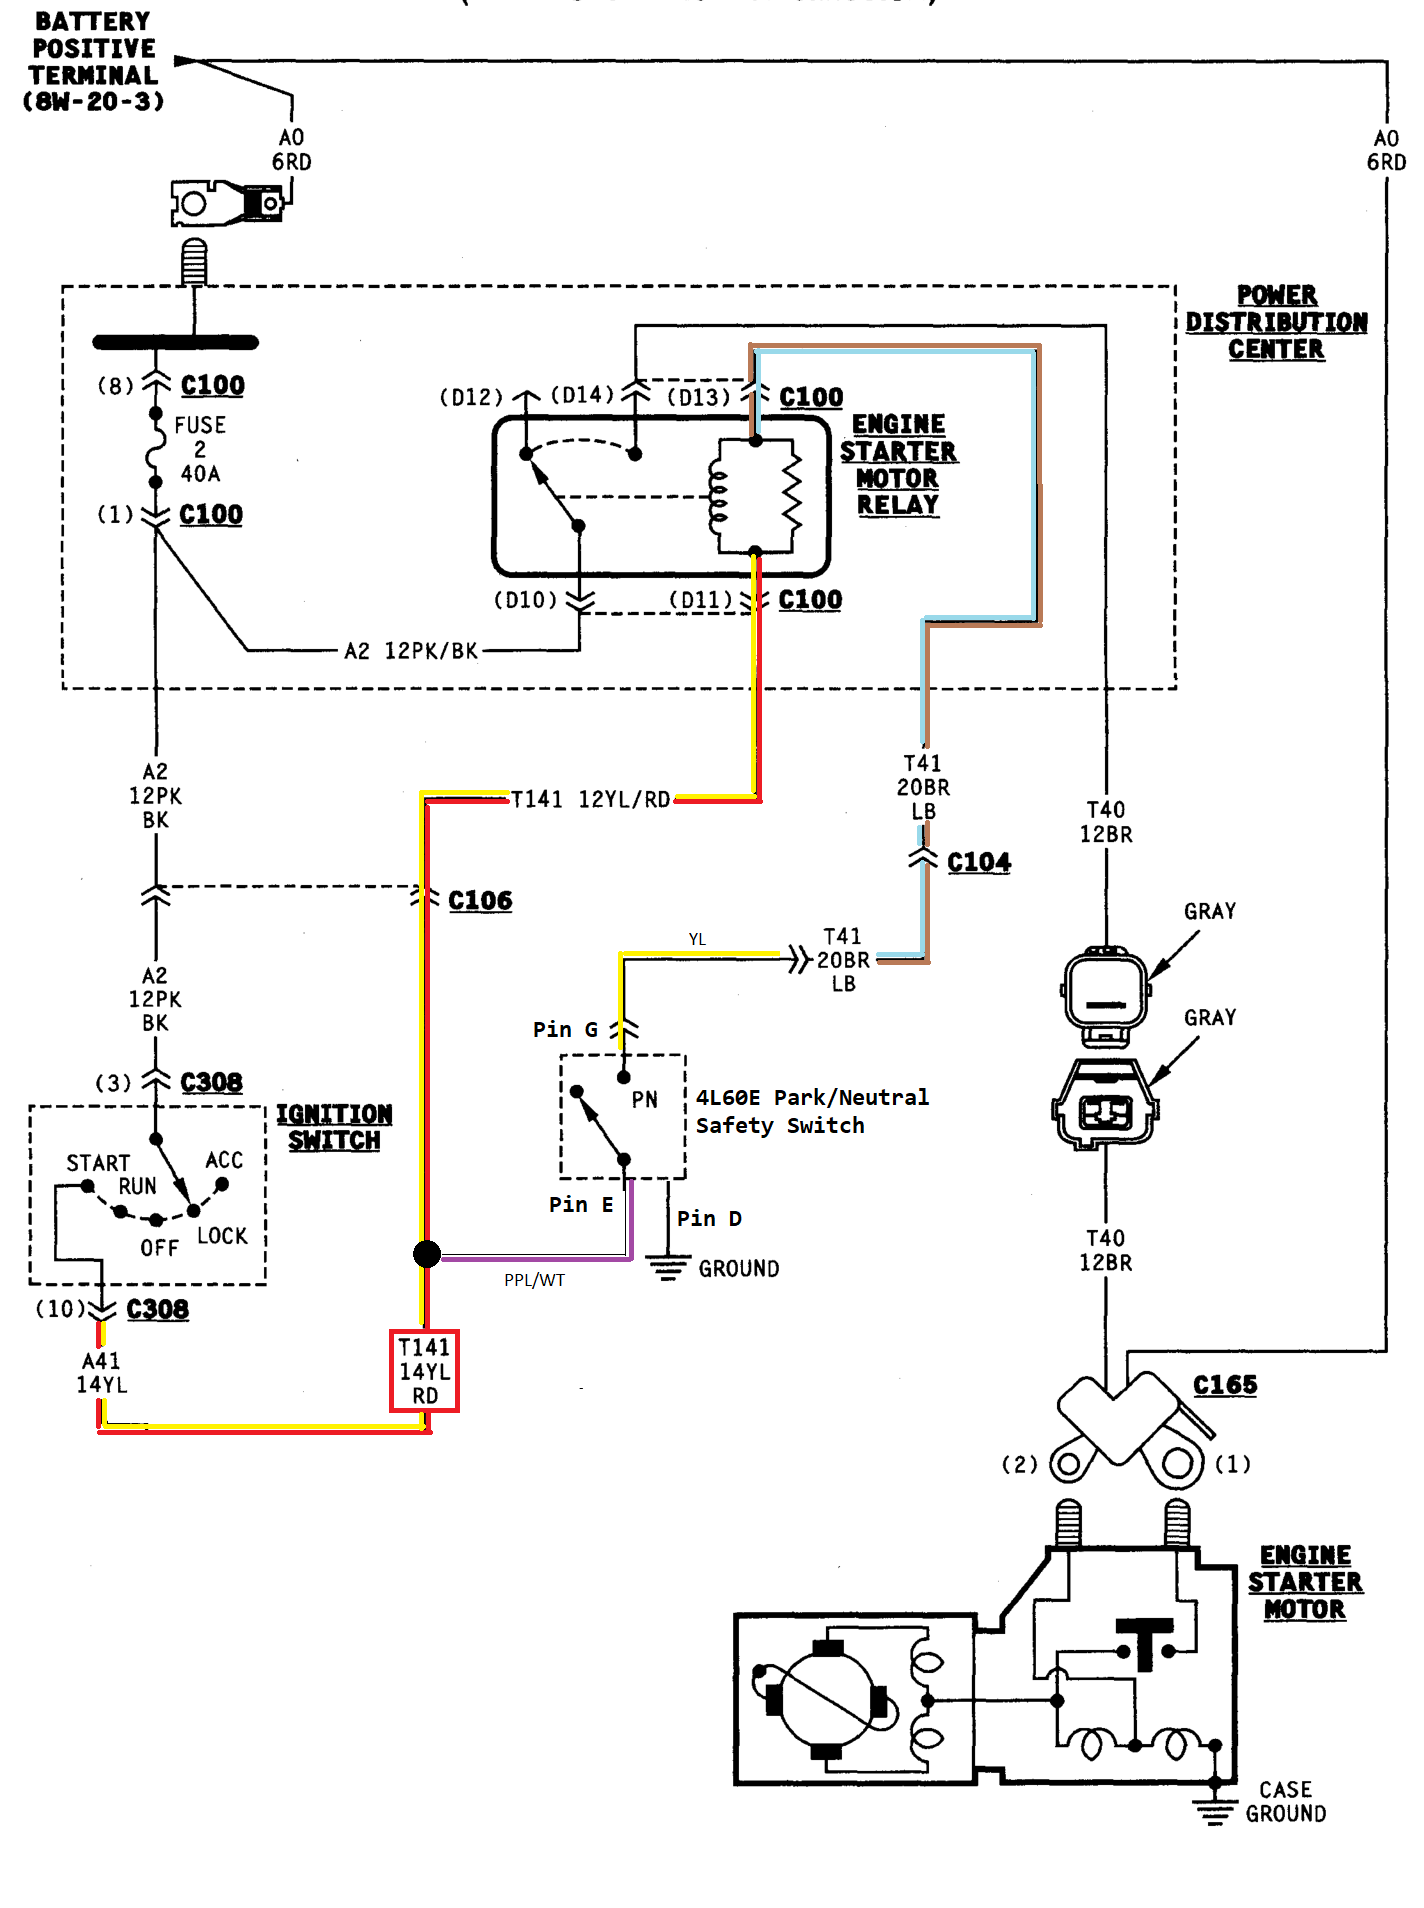 Wiring A Neutral Safety Switch